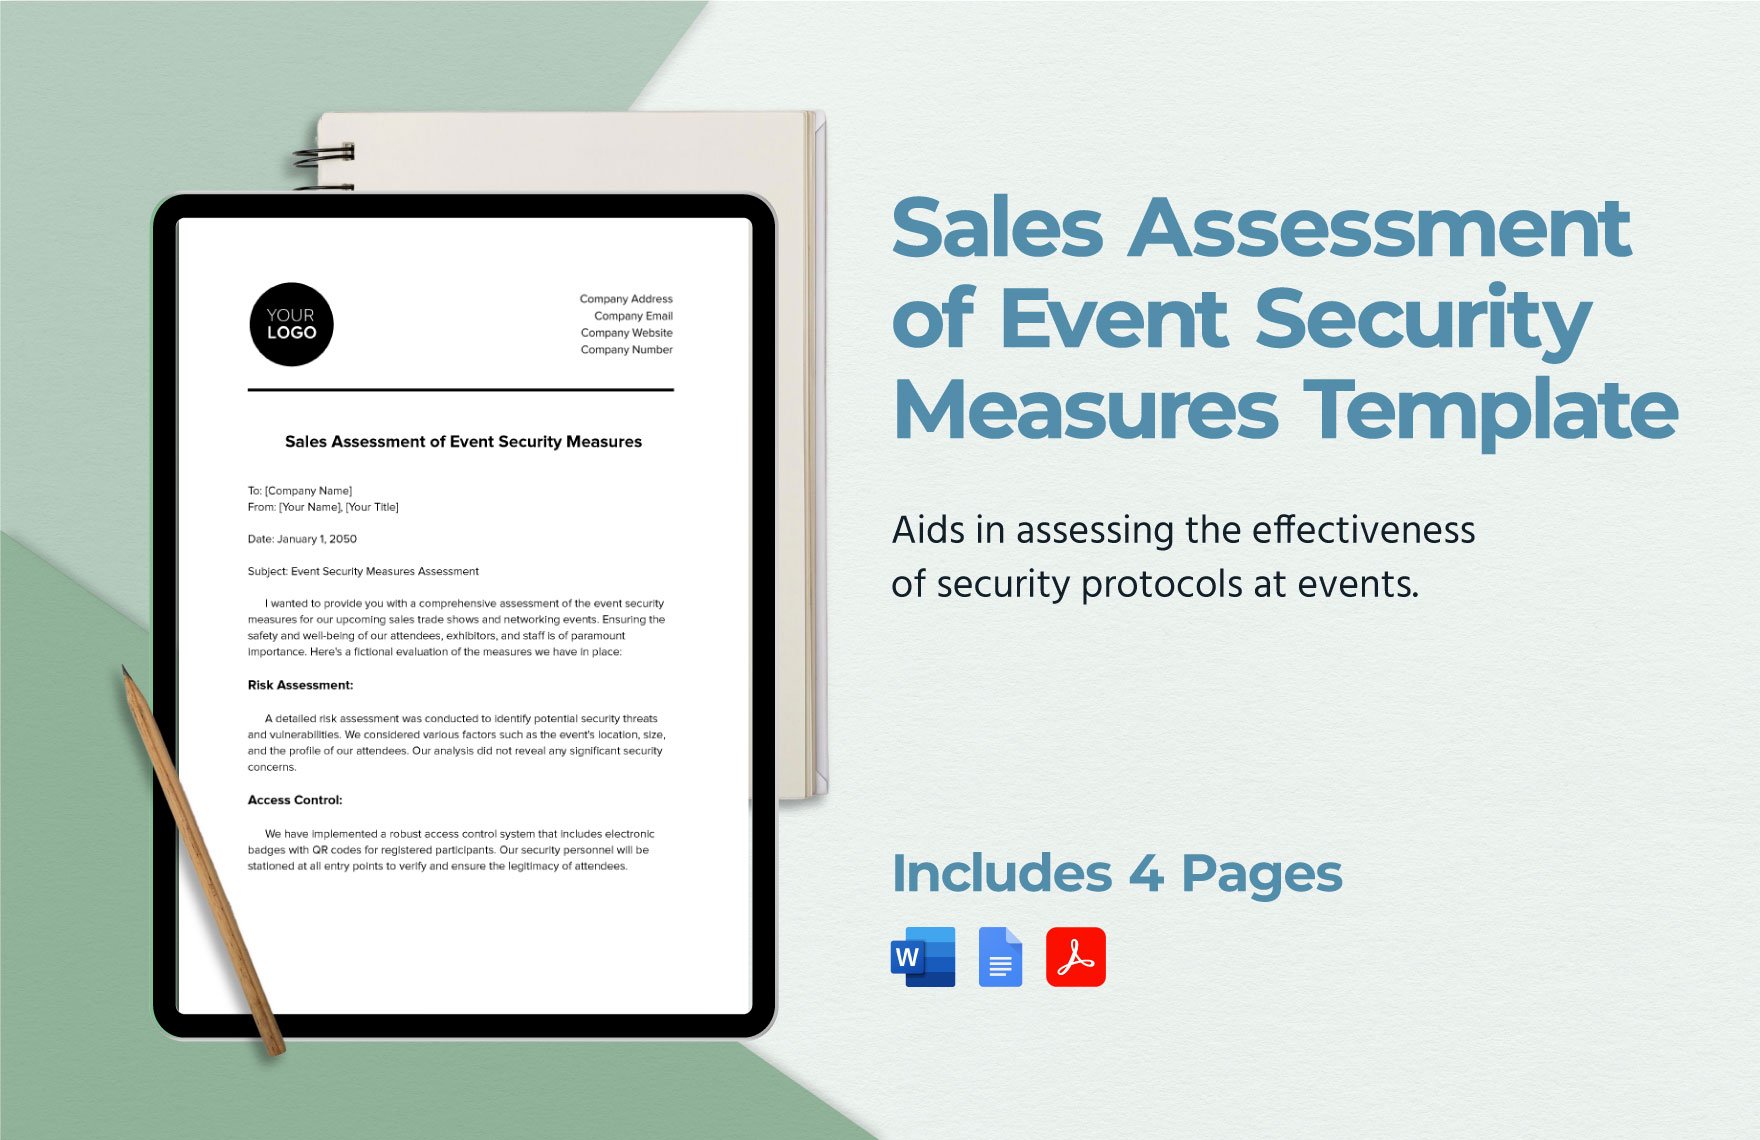 Sales Assessment of Event Security Measures Template